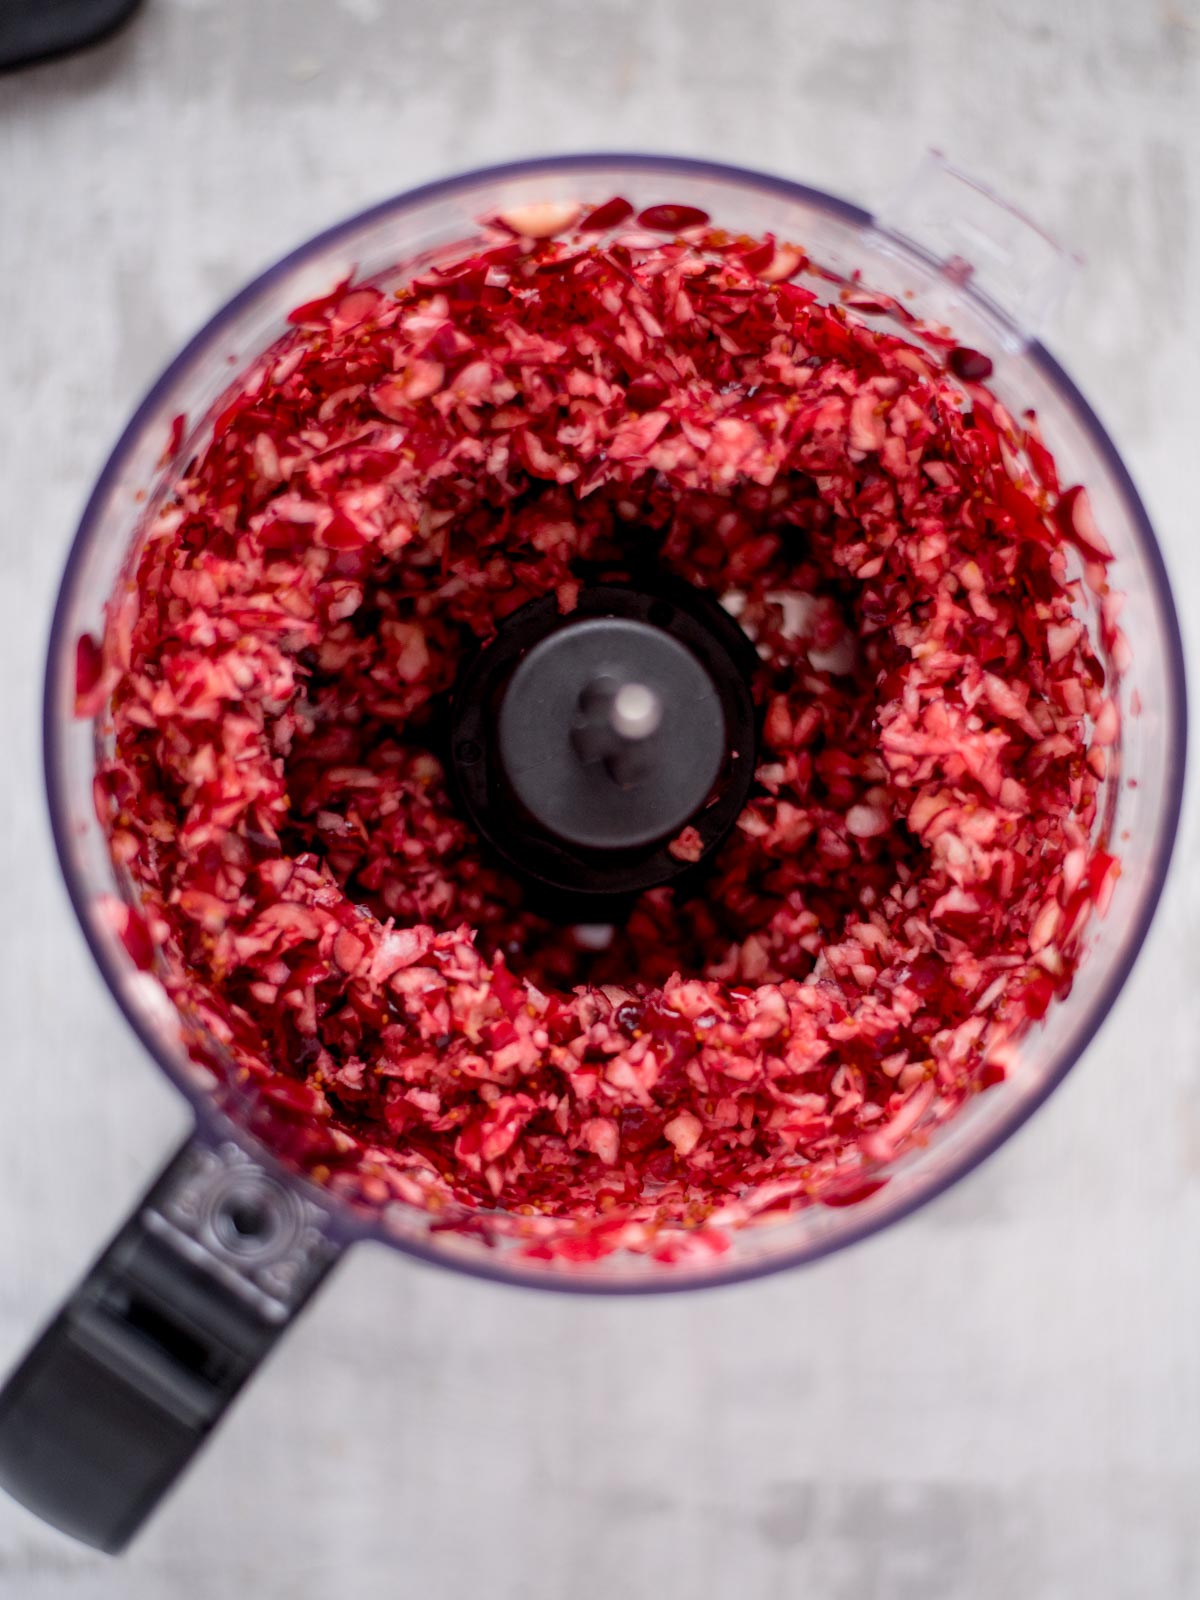 Food processer filled with diced cranberries.